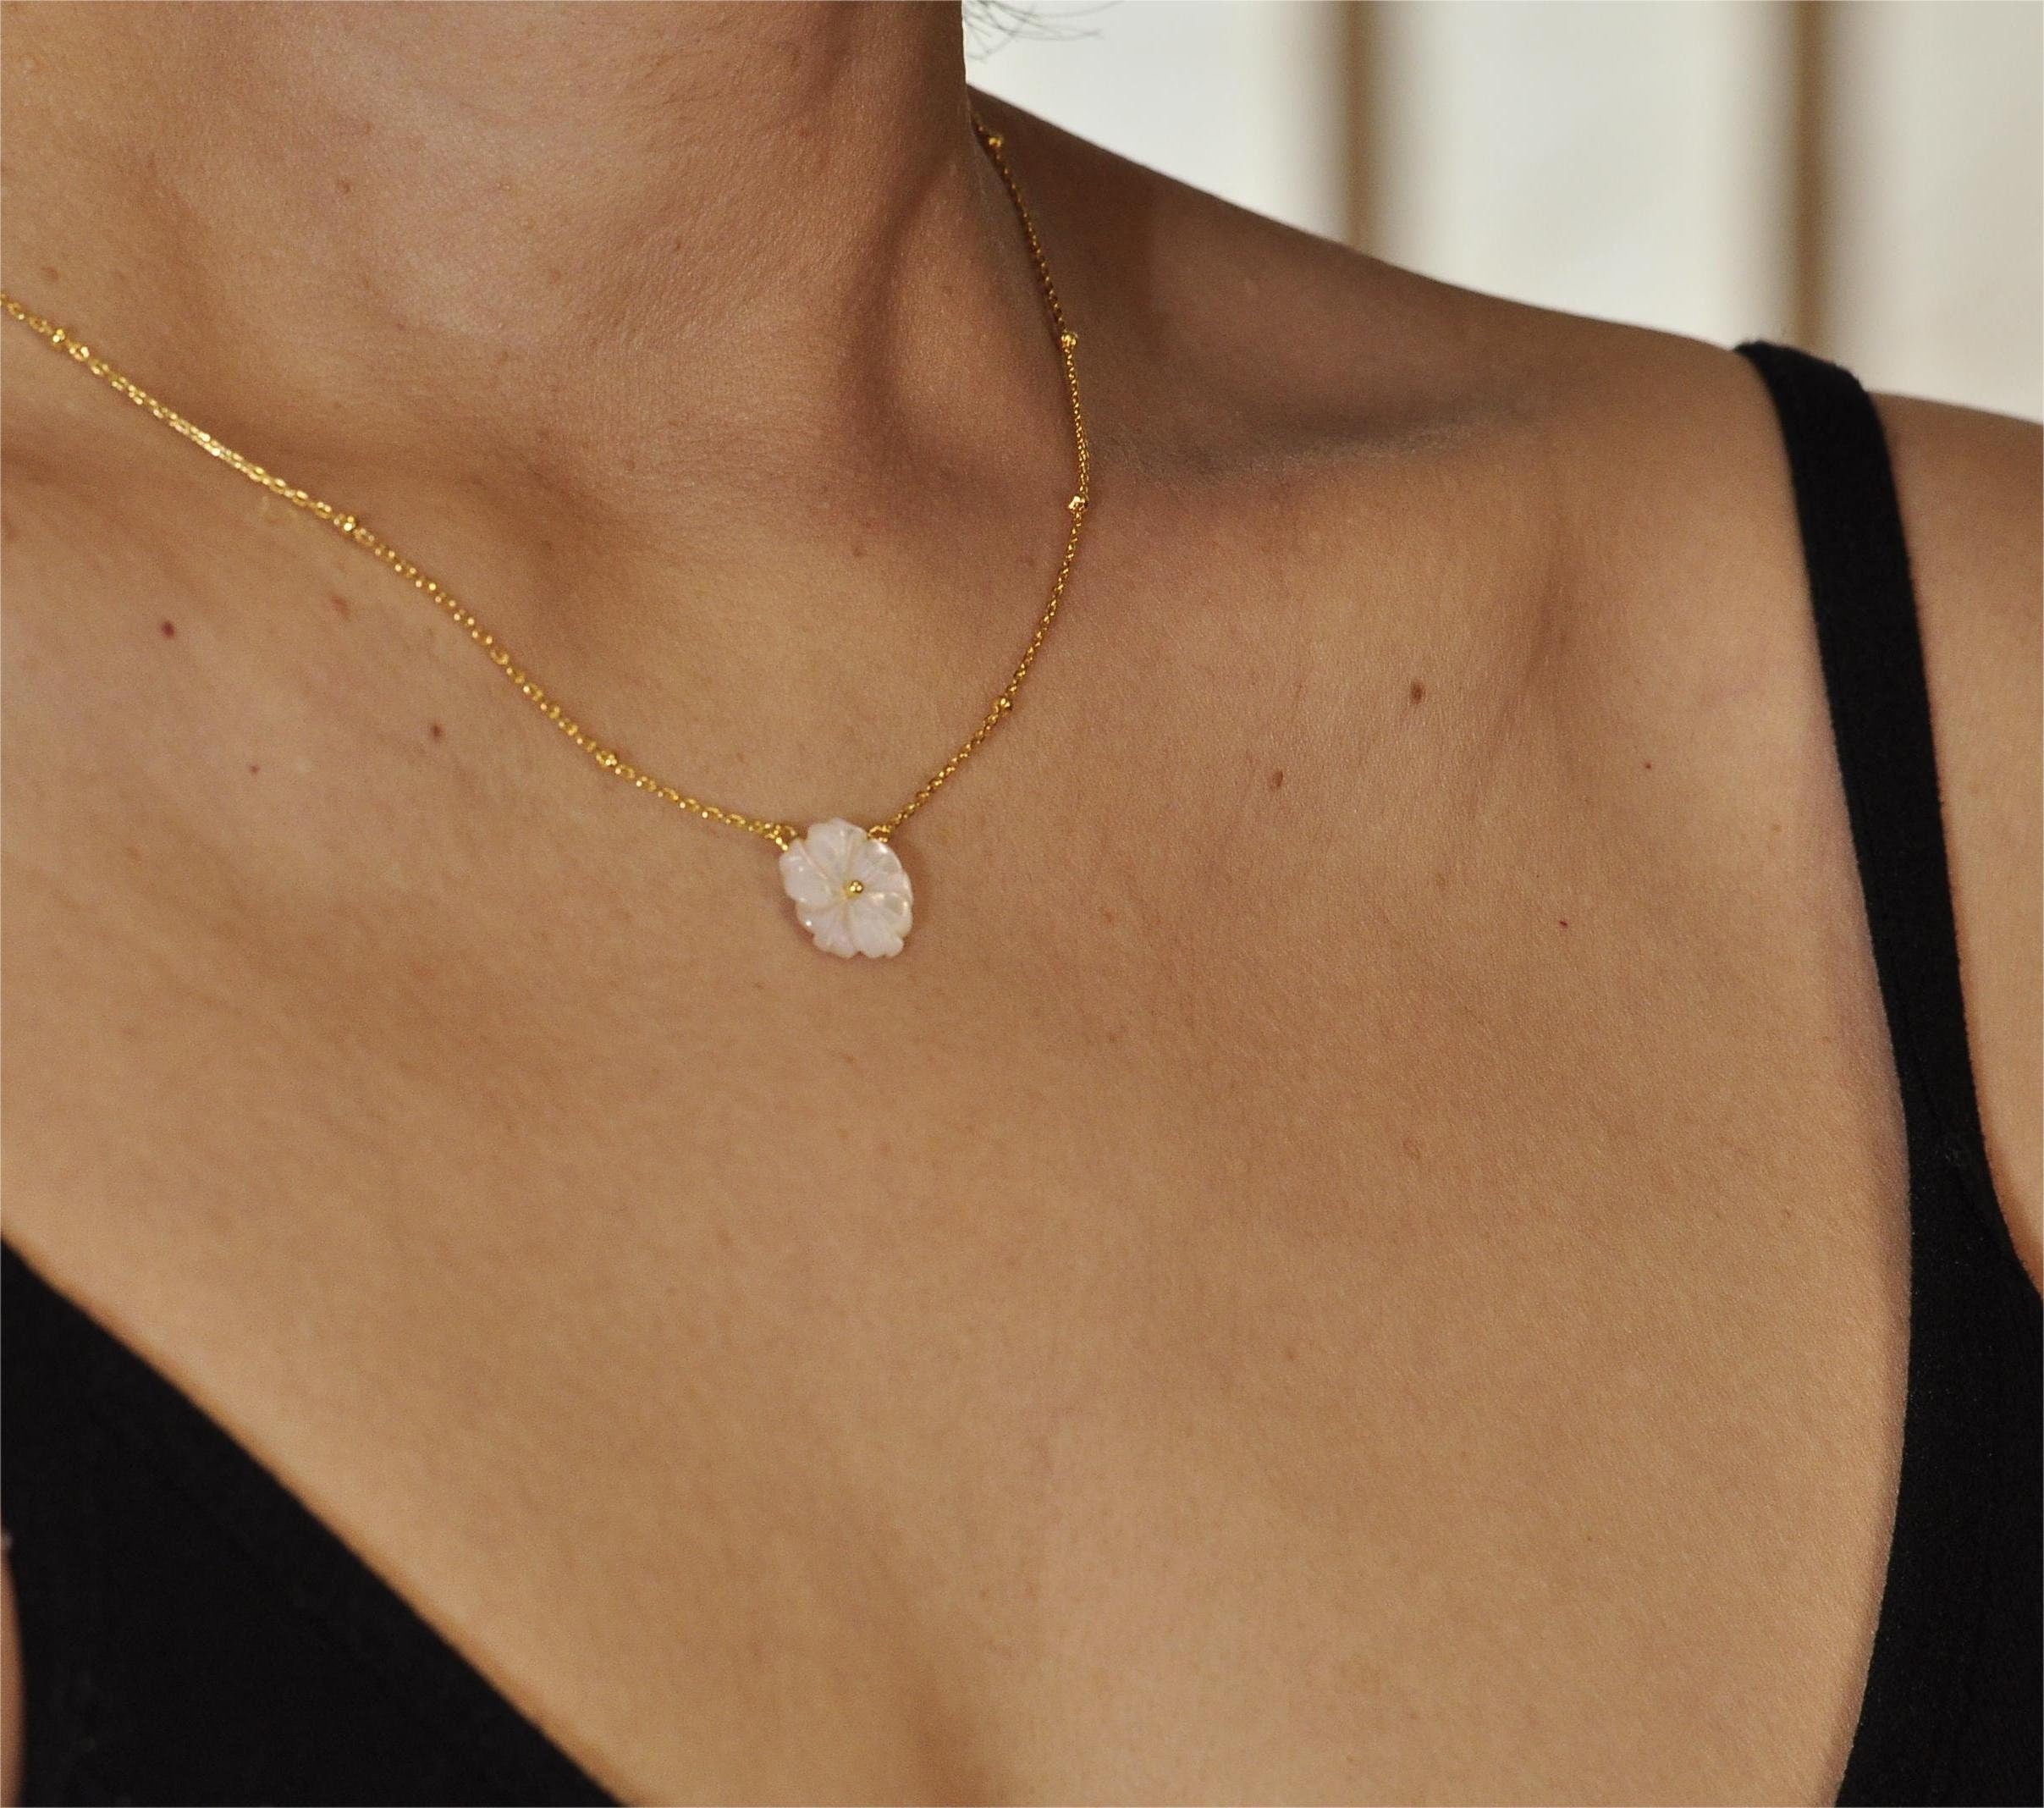 Dainty Flower 18k Gold Necklace, Summer Jewelry, Bridesmaid Gift, Gold Layered Necklace, Wedding Necklace, Happy Birthday Gift for her